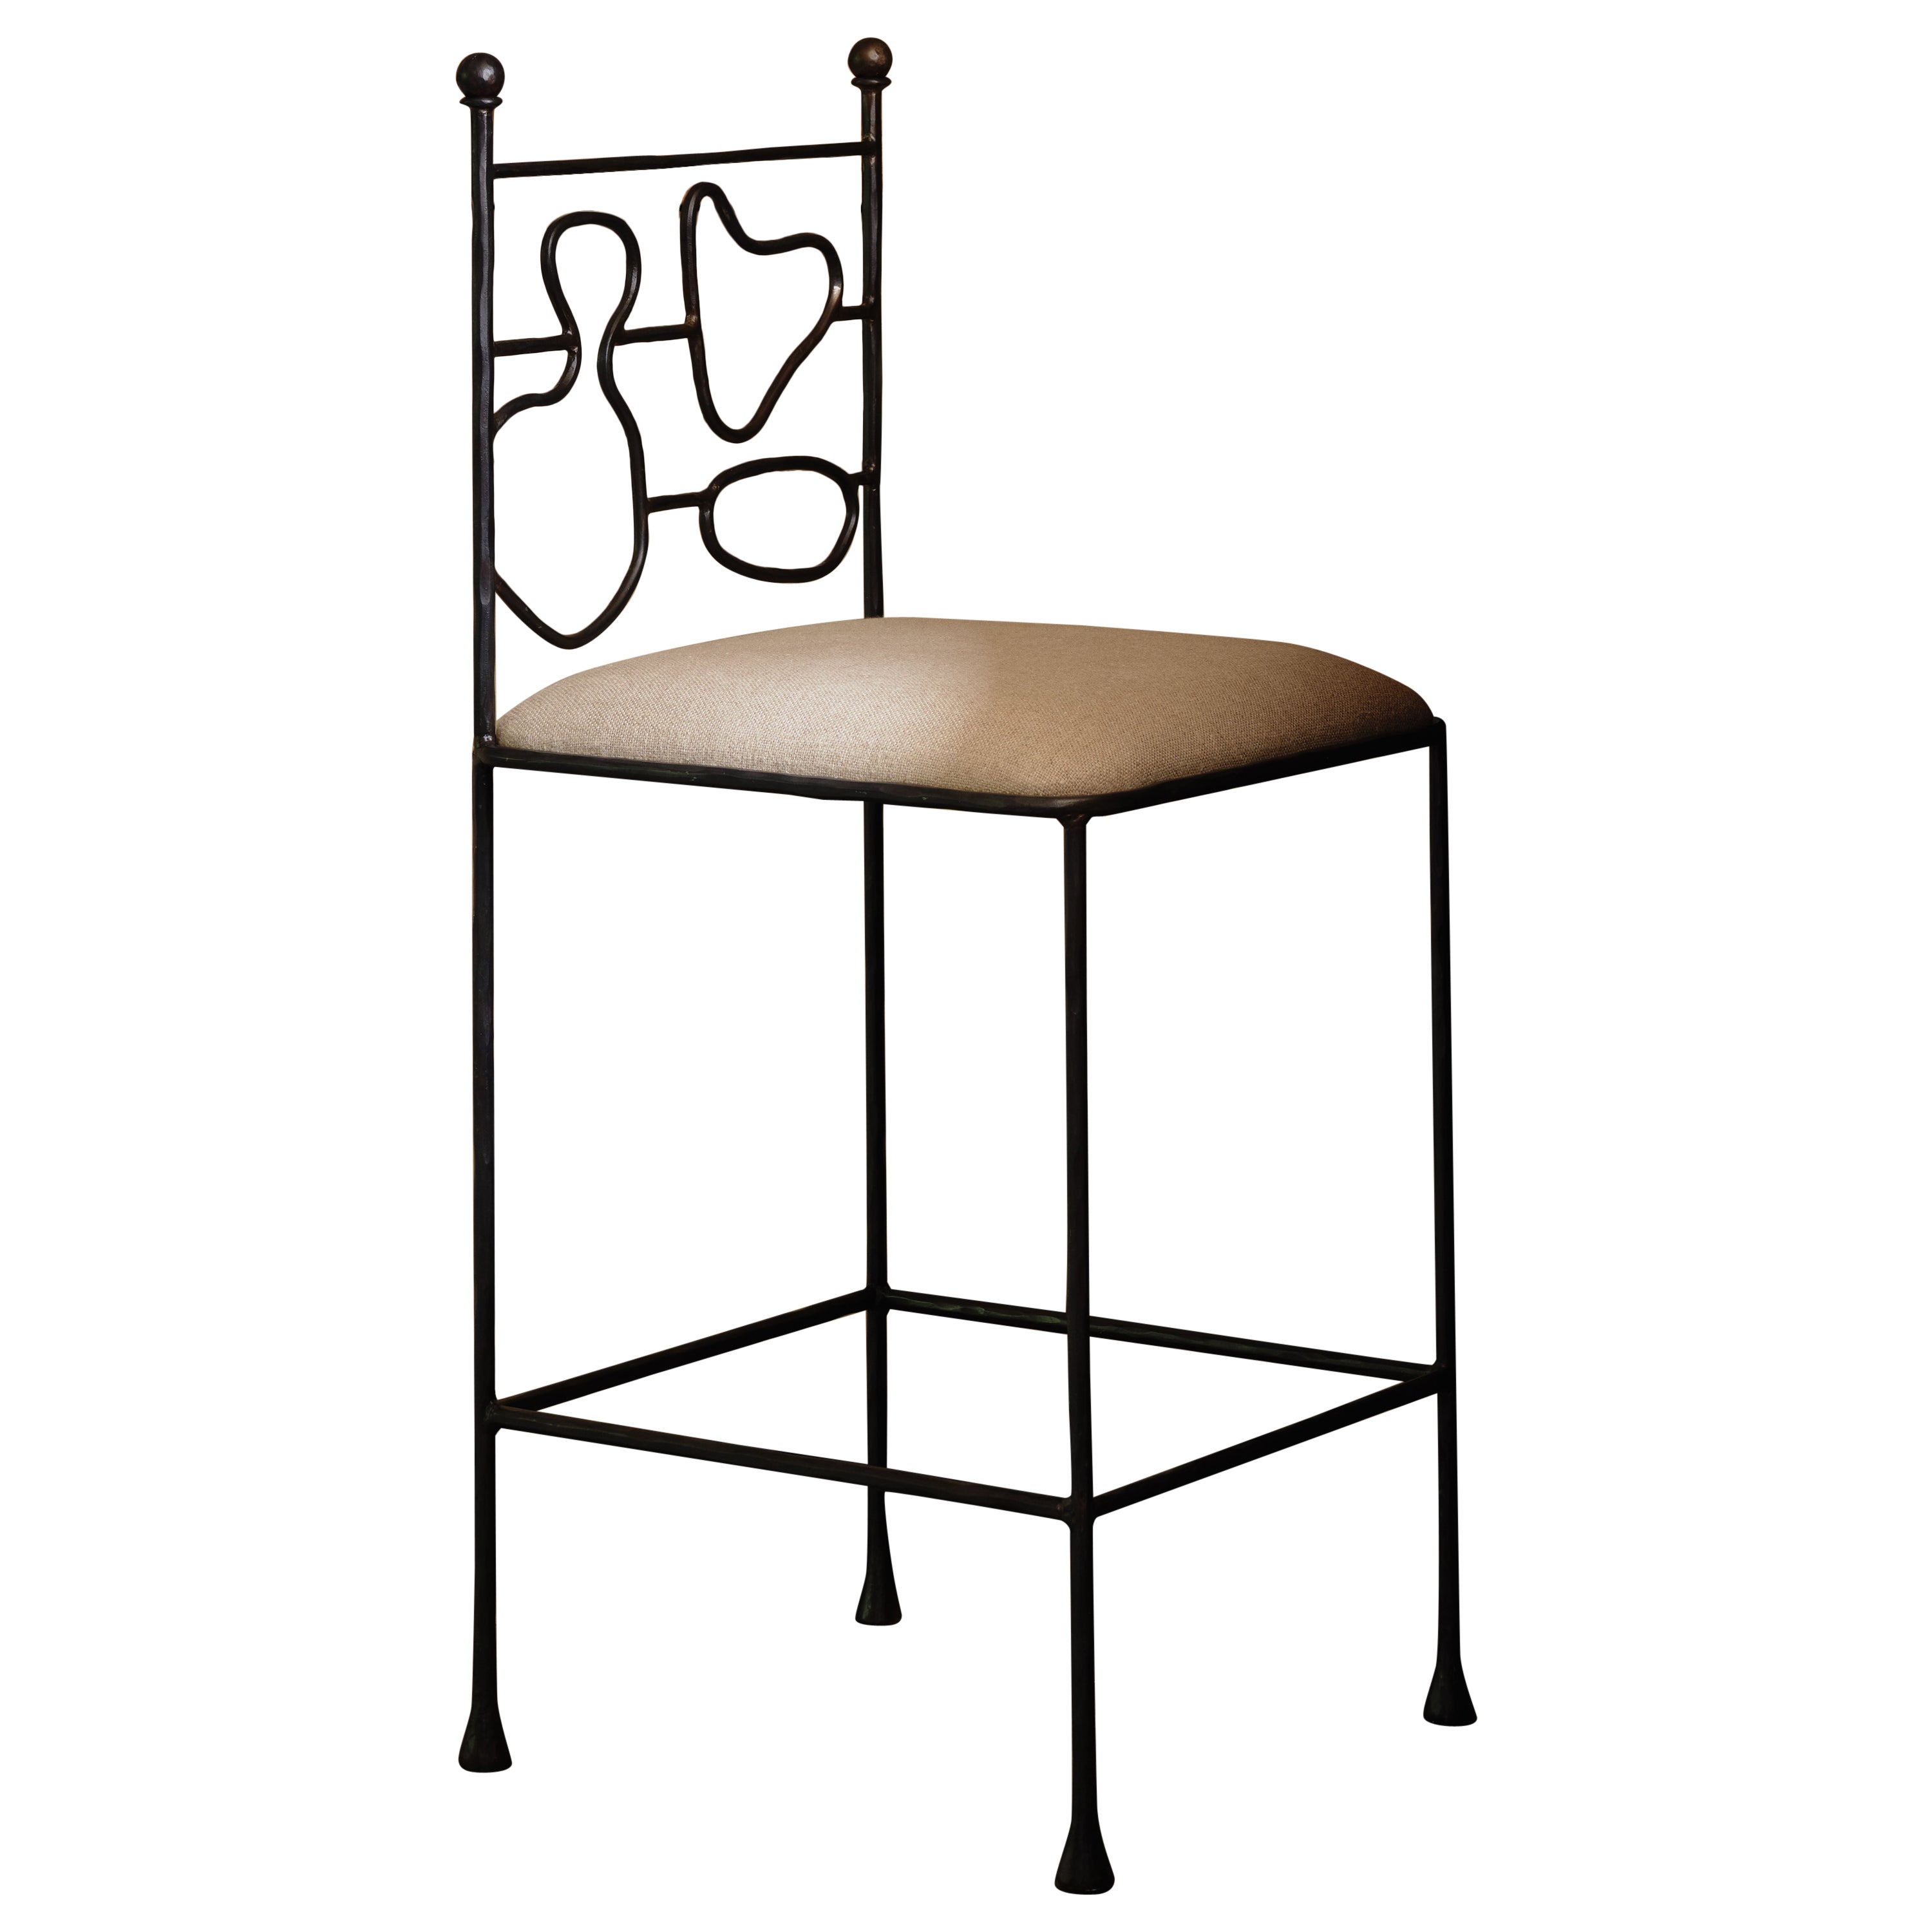 Anna Karlin Wrought Iron Counter Stool, F For Sale